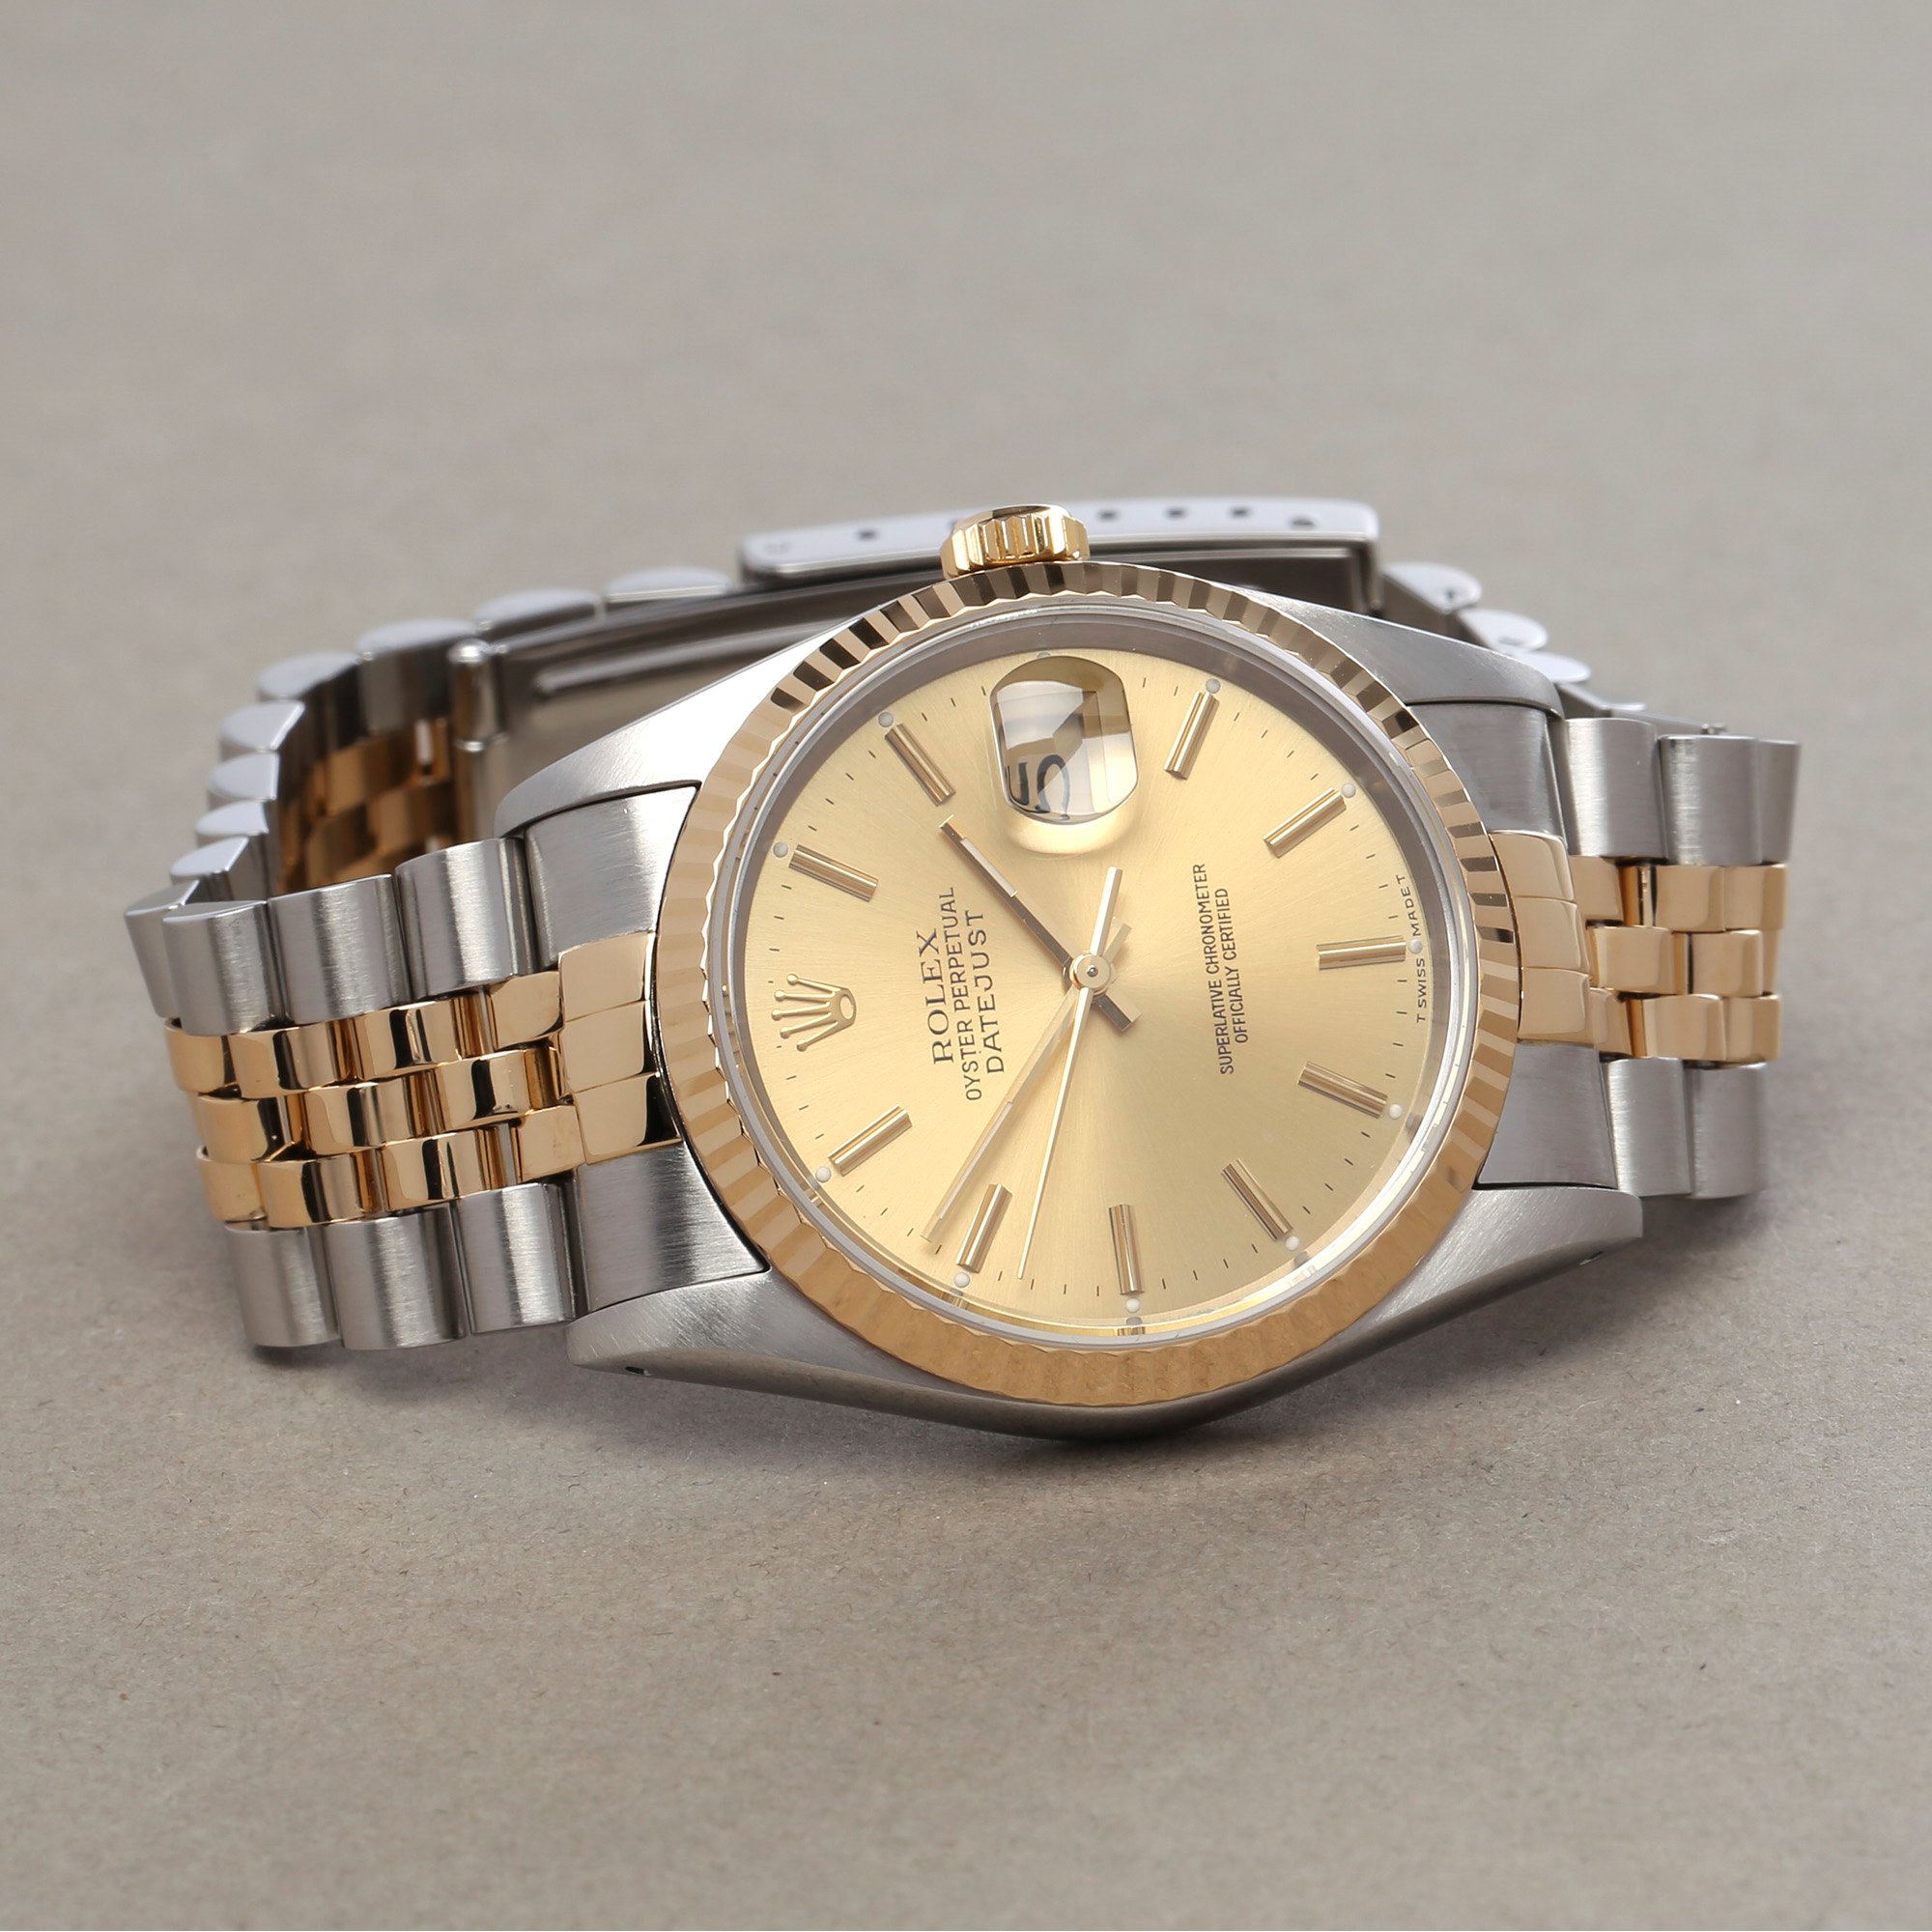 Rolex Datejust 36 18K Yellow Gold & Stainless Steel 16233